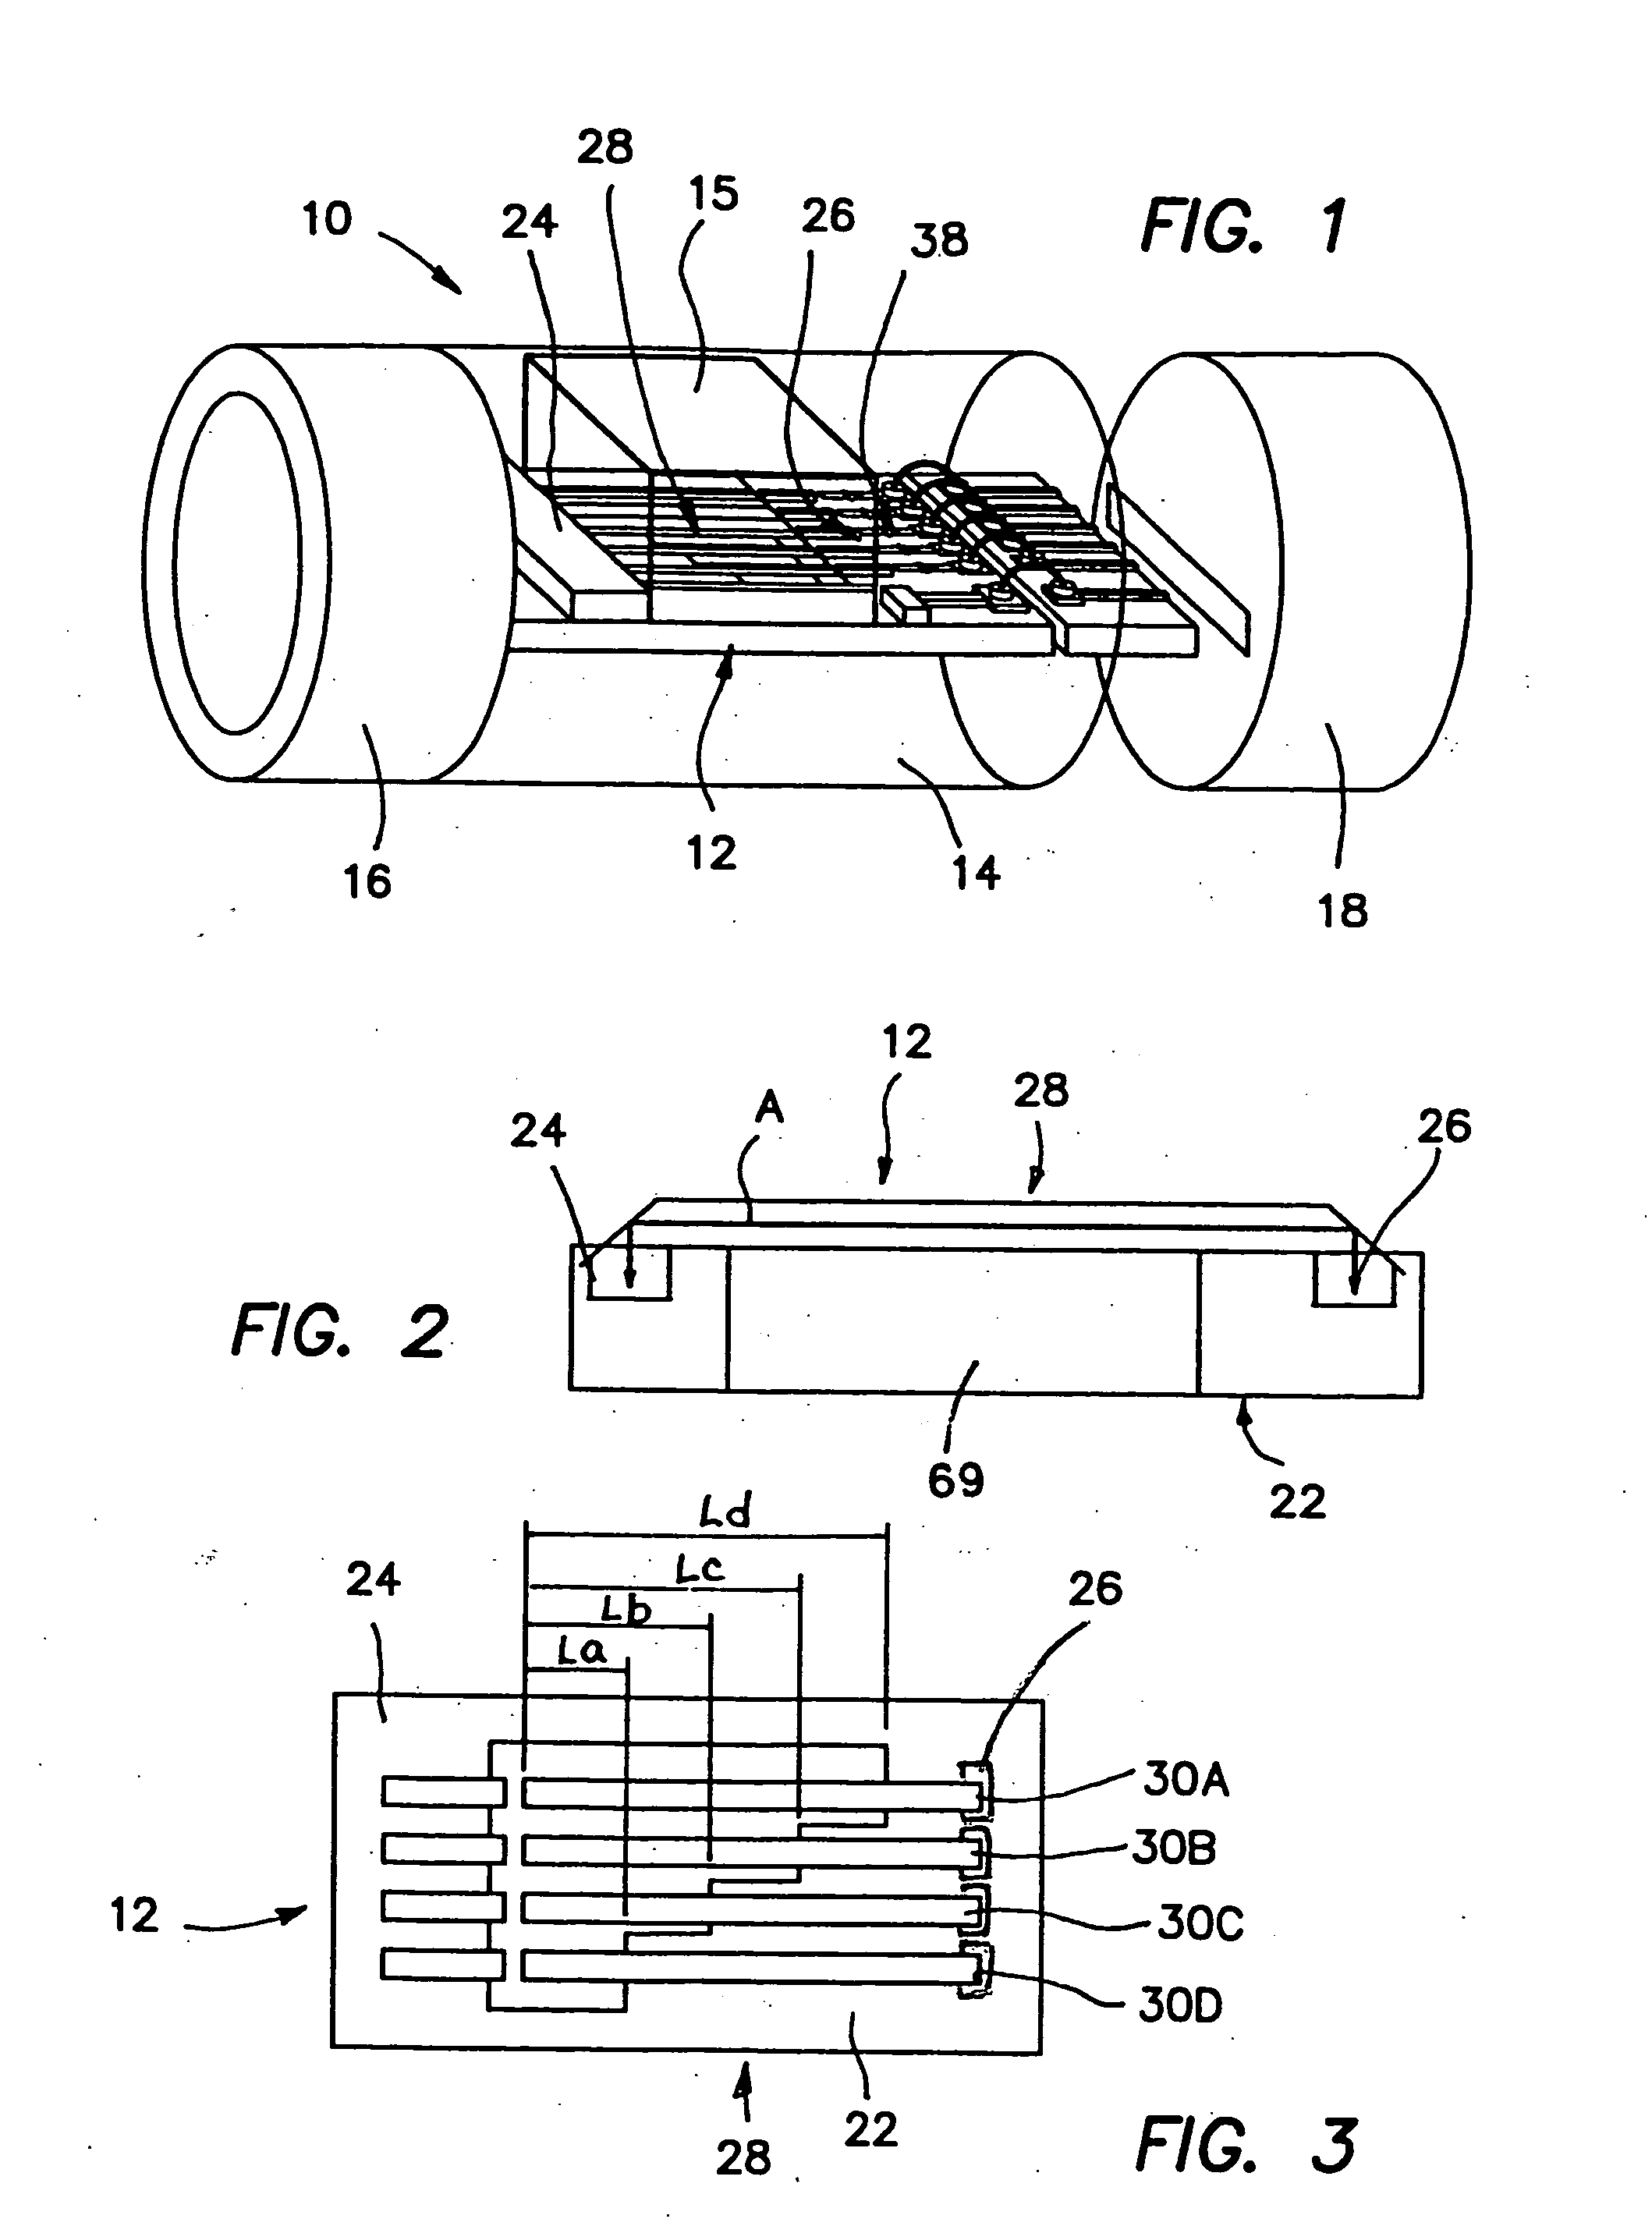 Optical waveguide vibration sensor for use in hearing aid